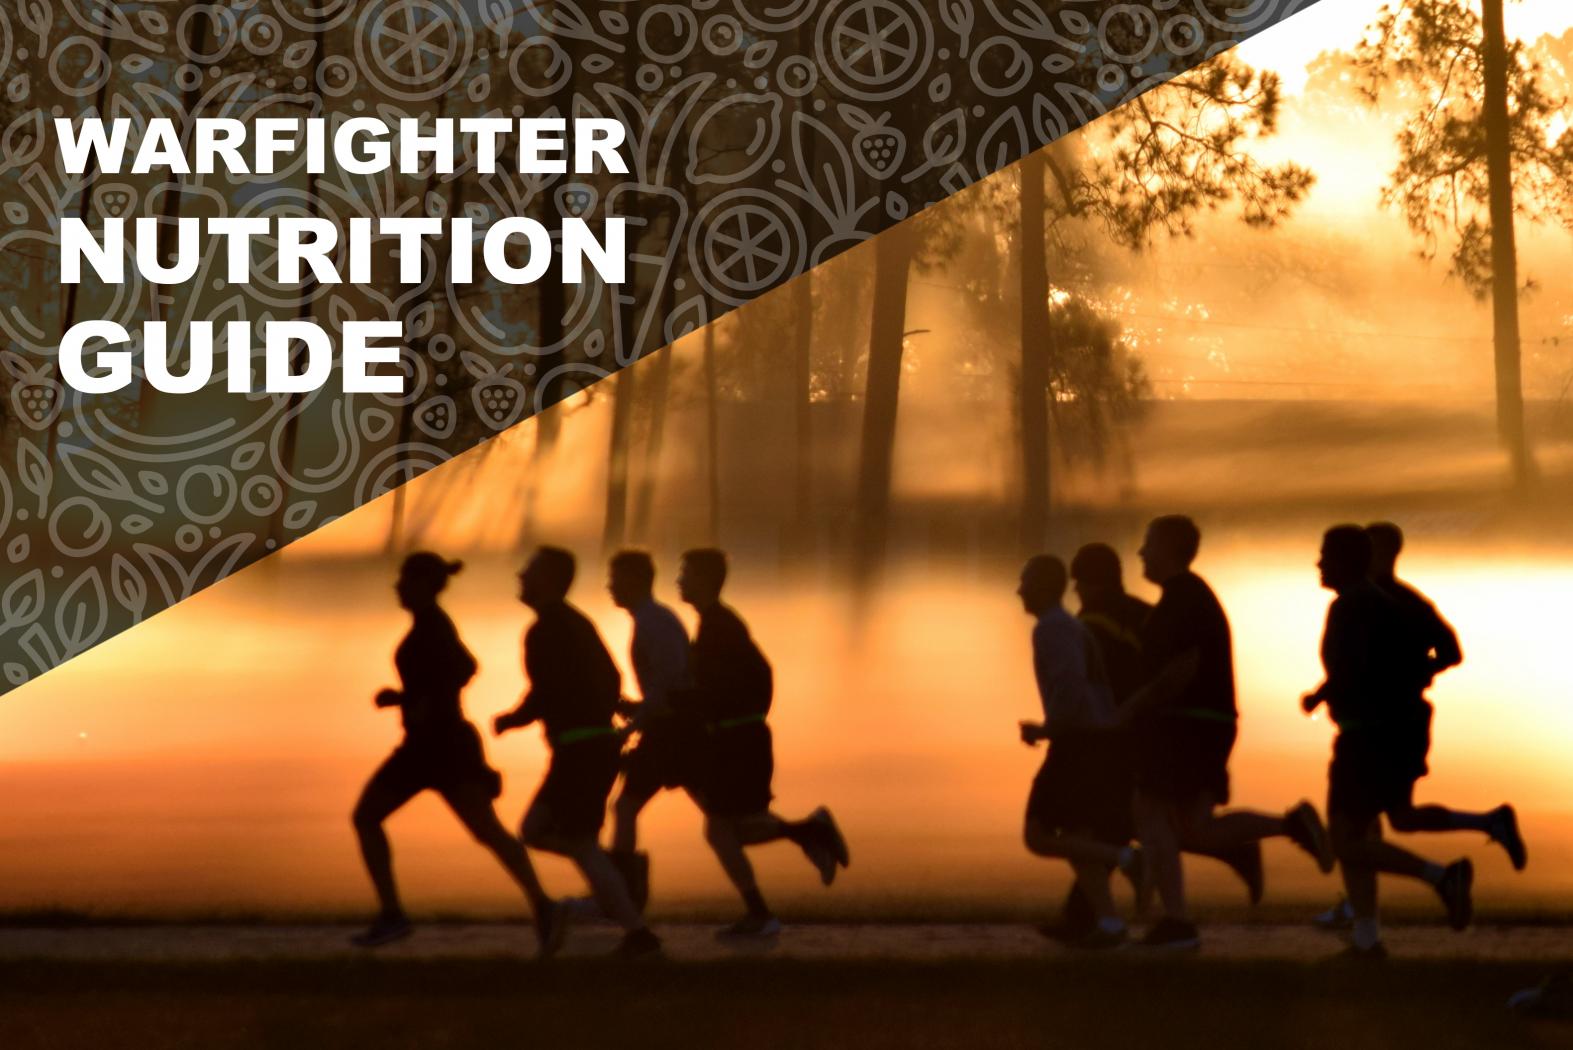 HPRC Warfighter Nutrition Guide. Chapter 9. Silhouette of people running for fitness training at sunrise.